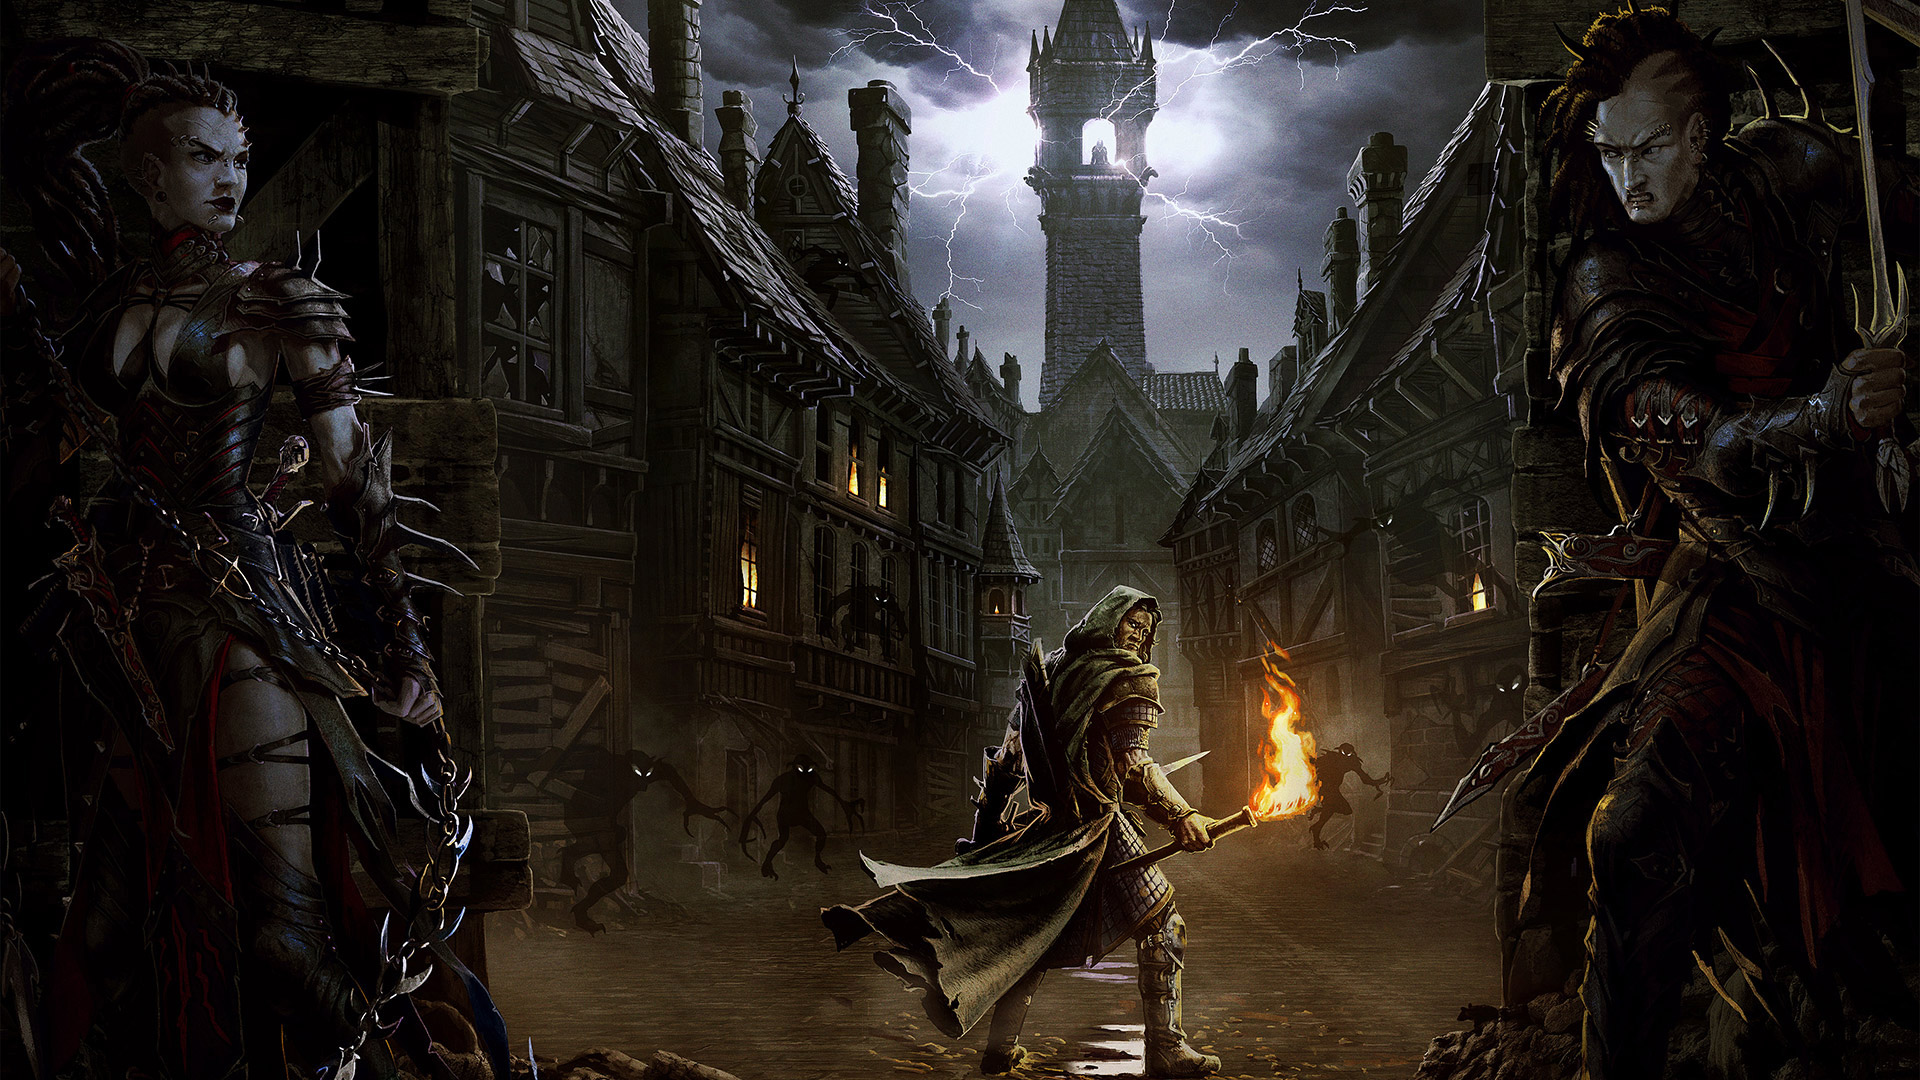 dungeons and dragons wallpaper,action adventure game,pc game,adventure game,games,cg artwork